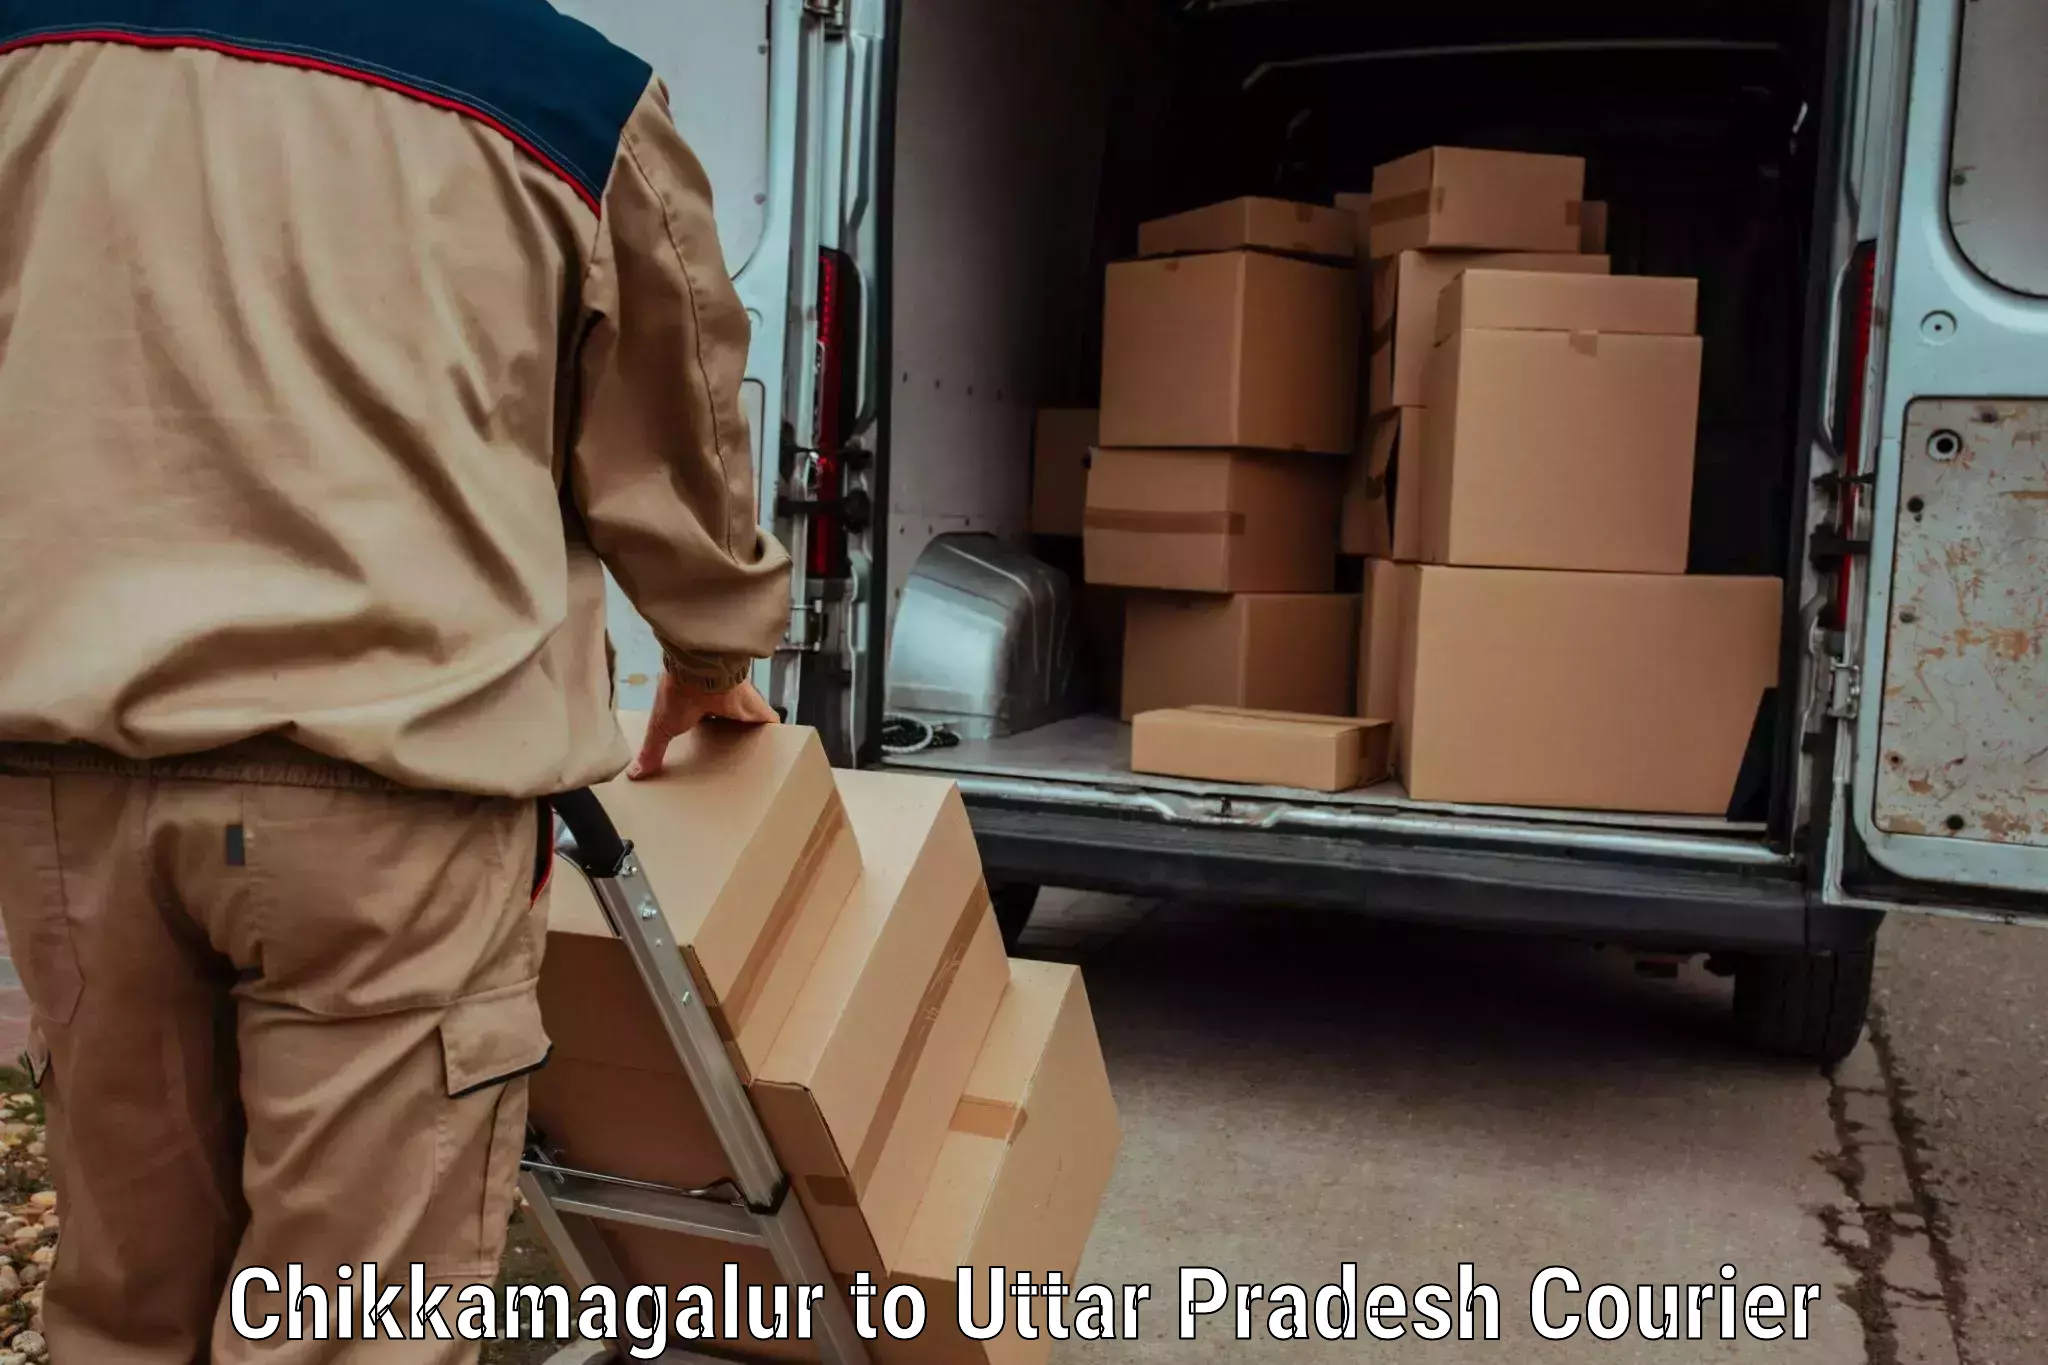 Dynamic courier operations Chikkamagalur to Koraon